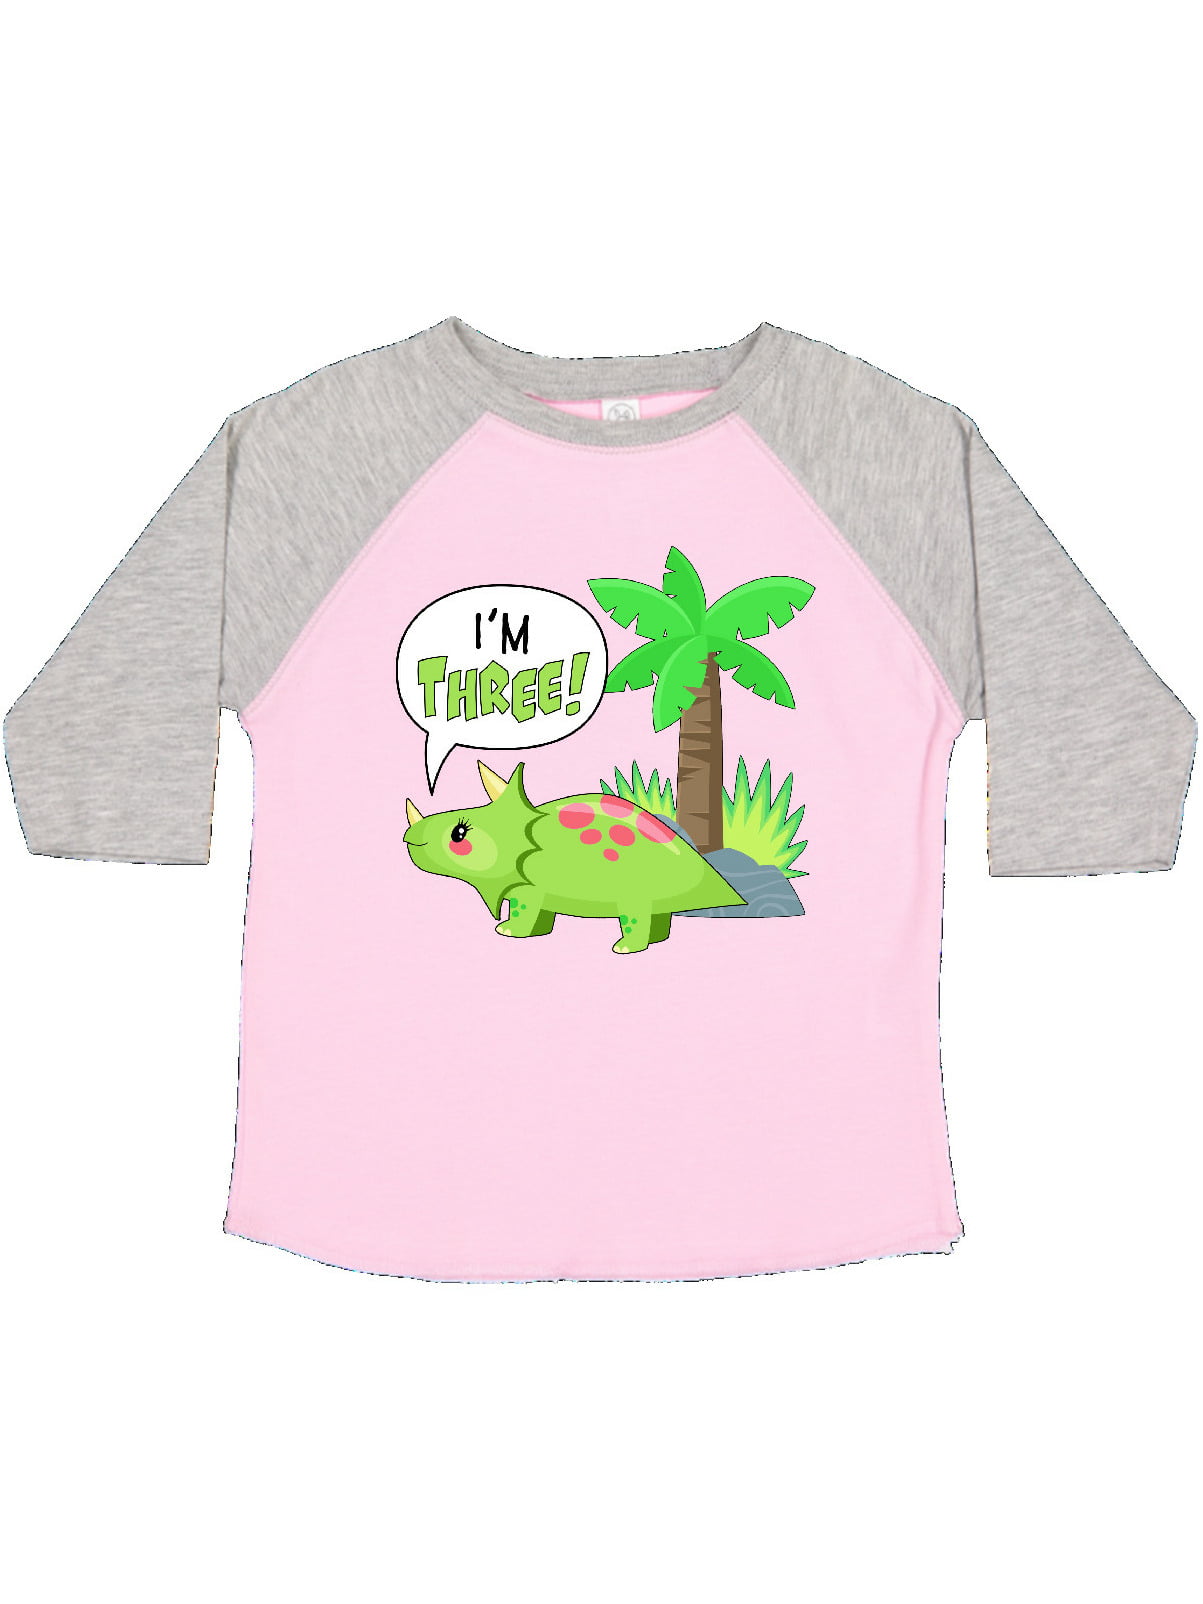 personalized gift for boy or girl Triceratops Dinosaur birthday party shirt for kids tshirt any birthday dino t-rex theme party shirts